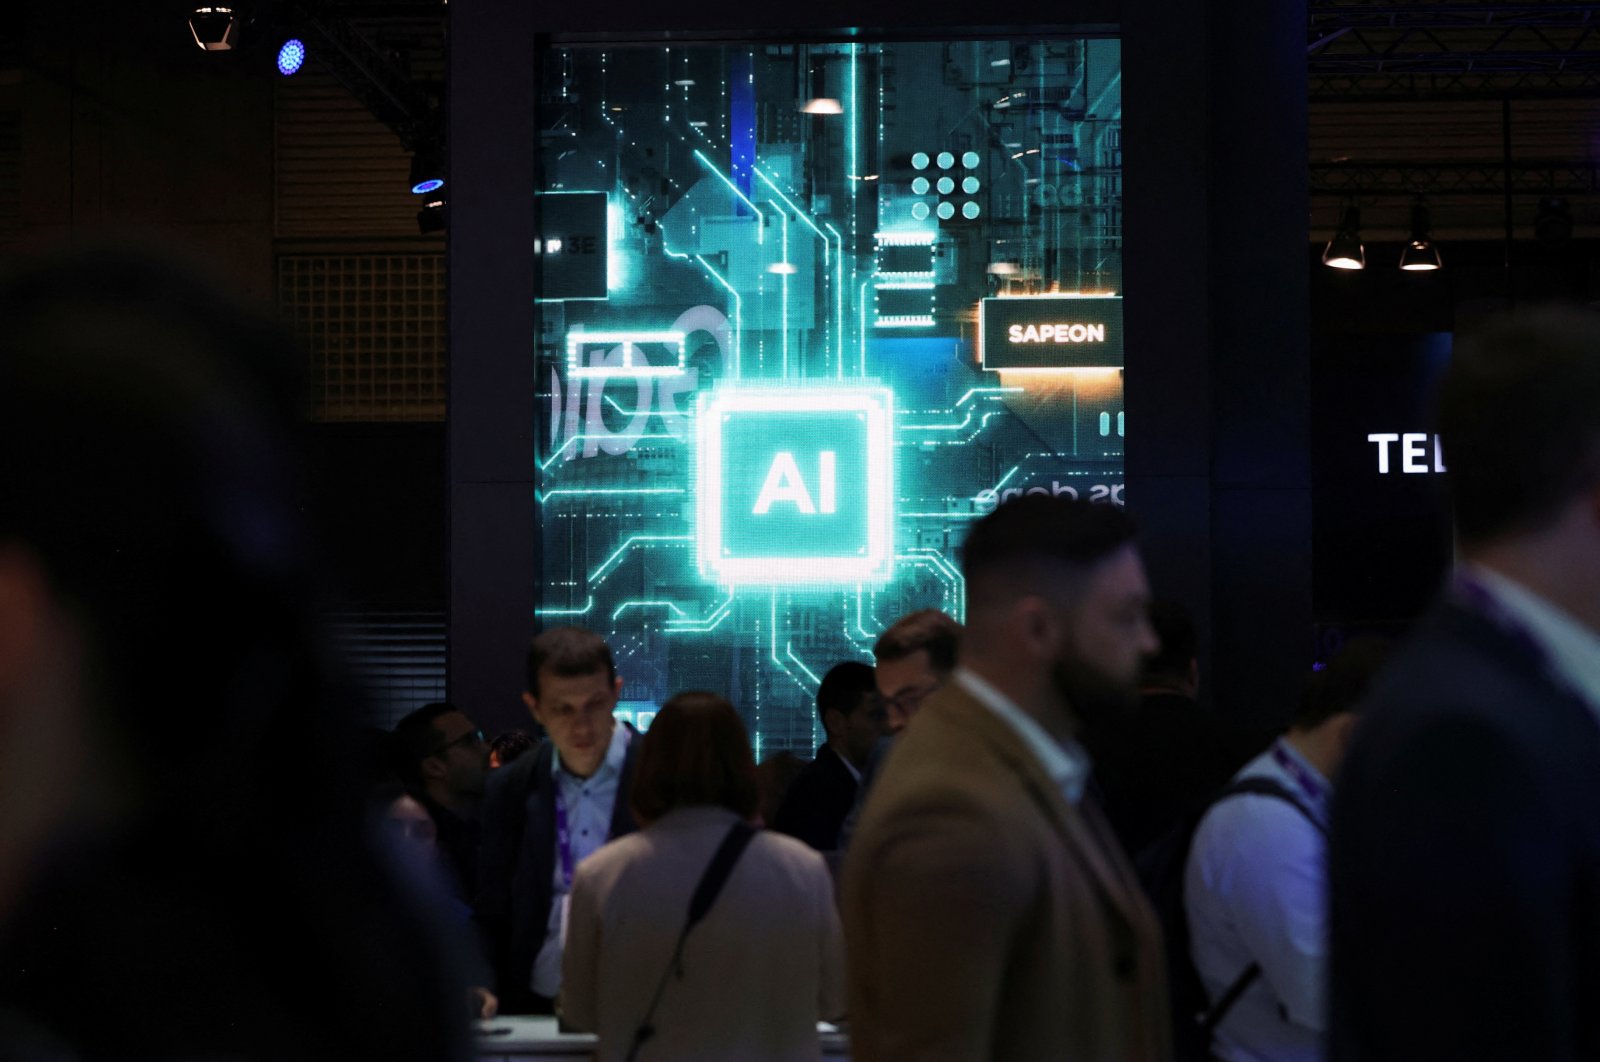 People walk near a sign for Sapeon, an artificial intelligence (AI) chip company, at the Mobile World Congress (MWC) in Barcelona, Spain, Feb. 27, 2024. (Reuters Photo)